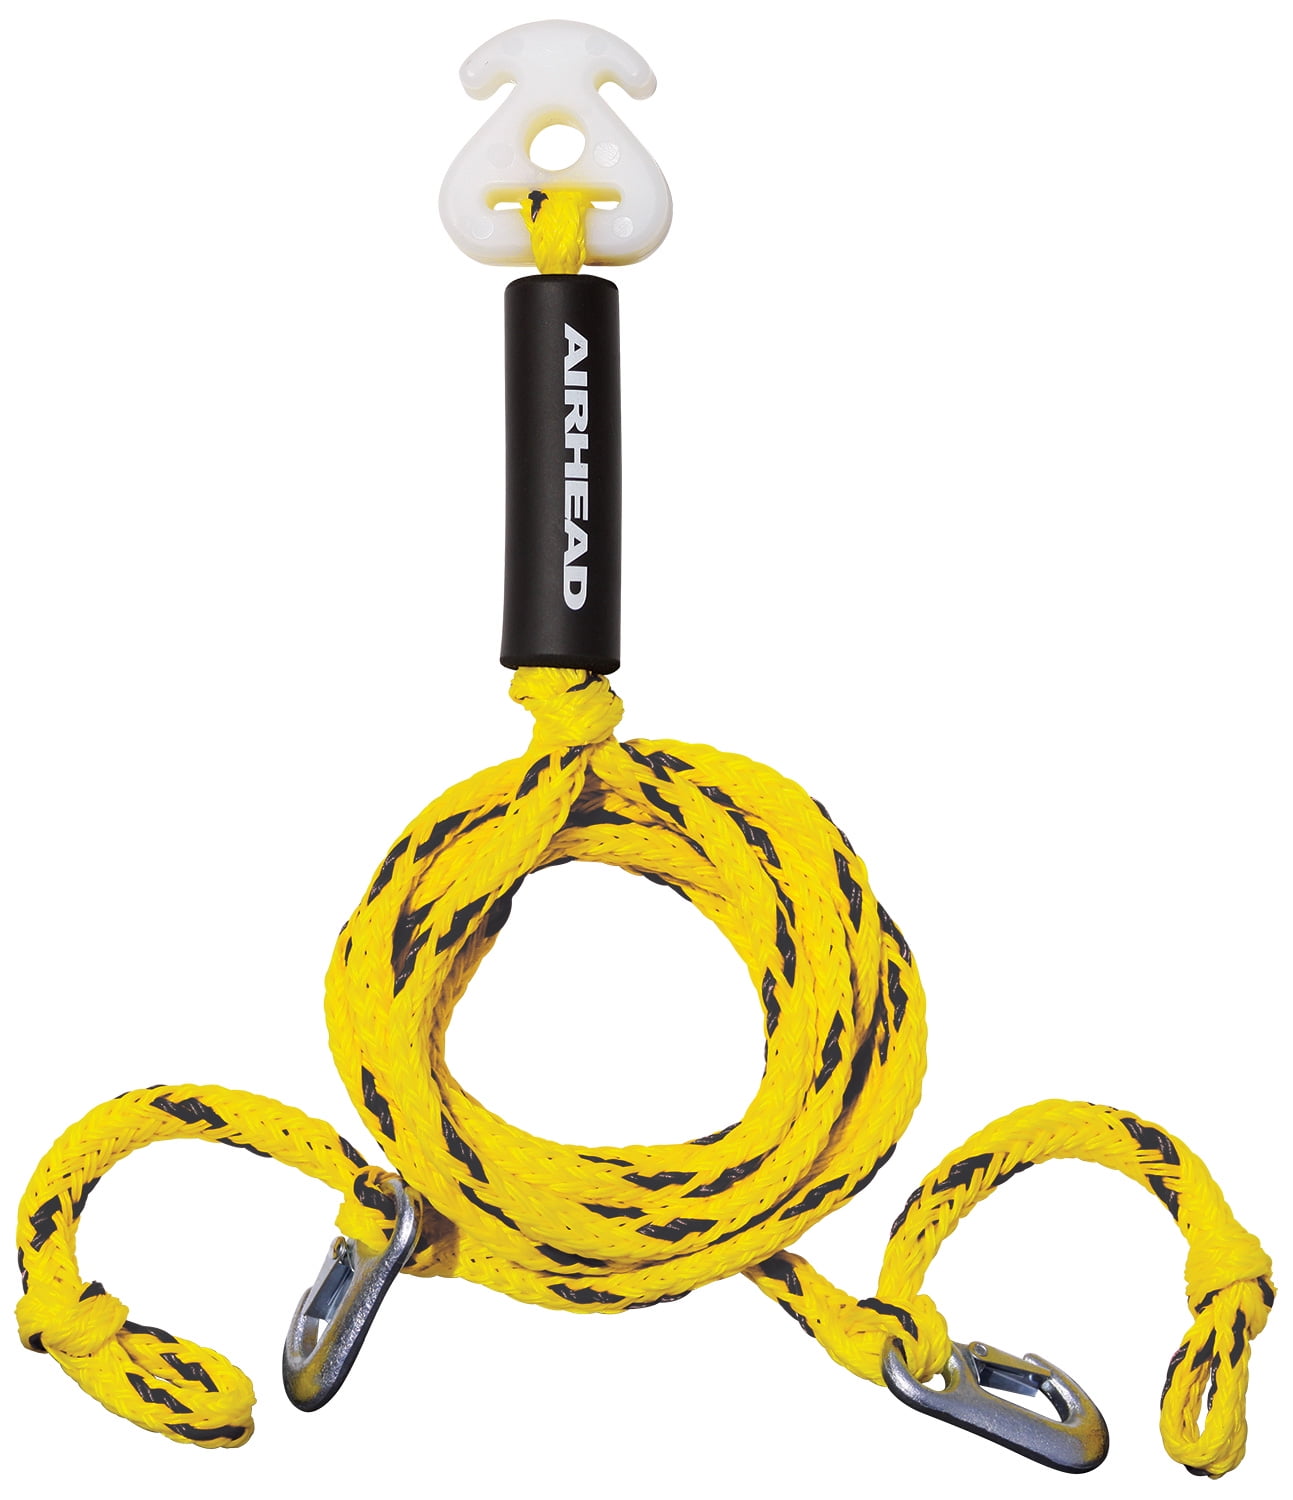 AIRHEAD WMR-20123 Boat Tow Rope for sale online 